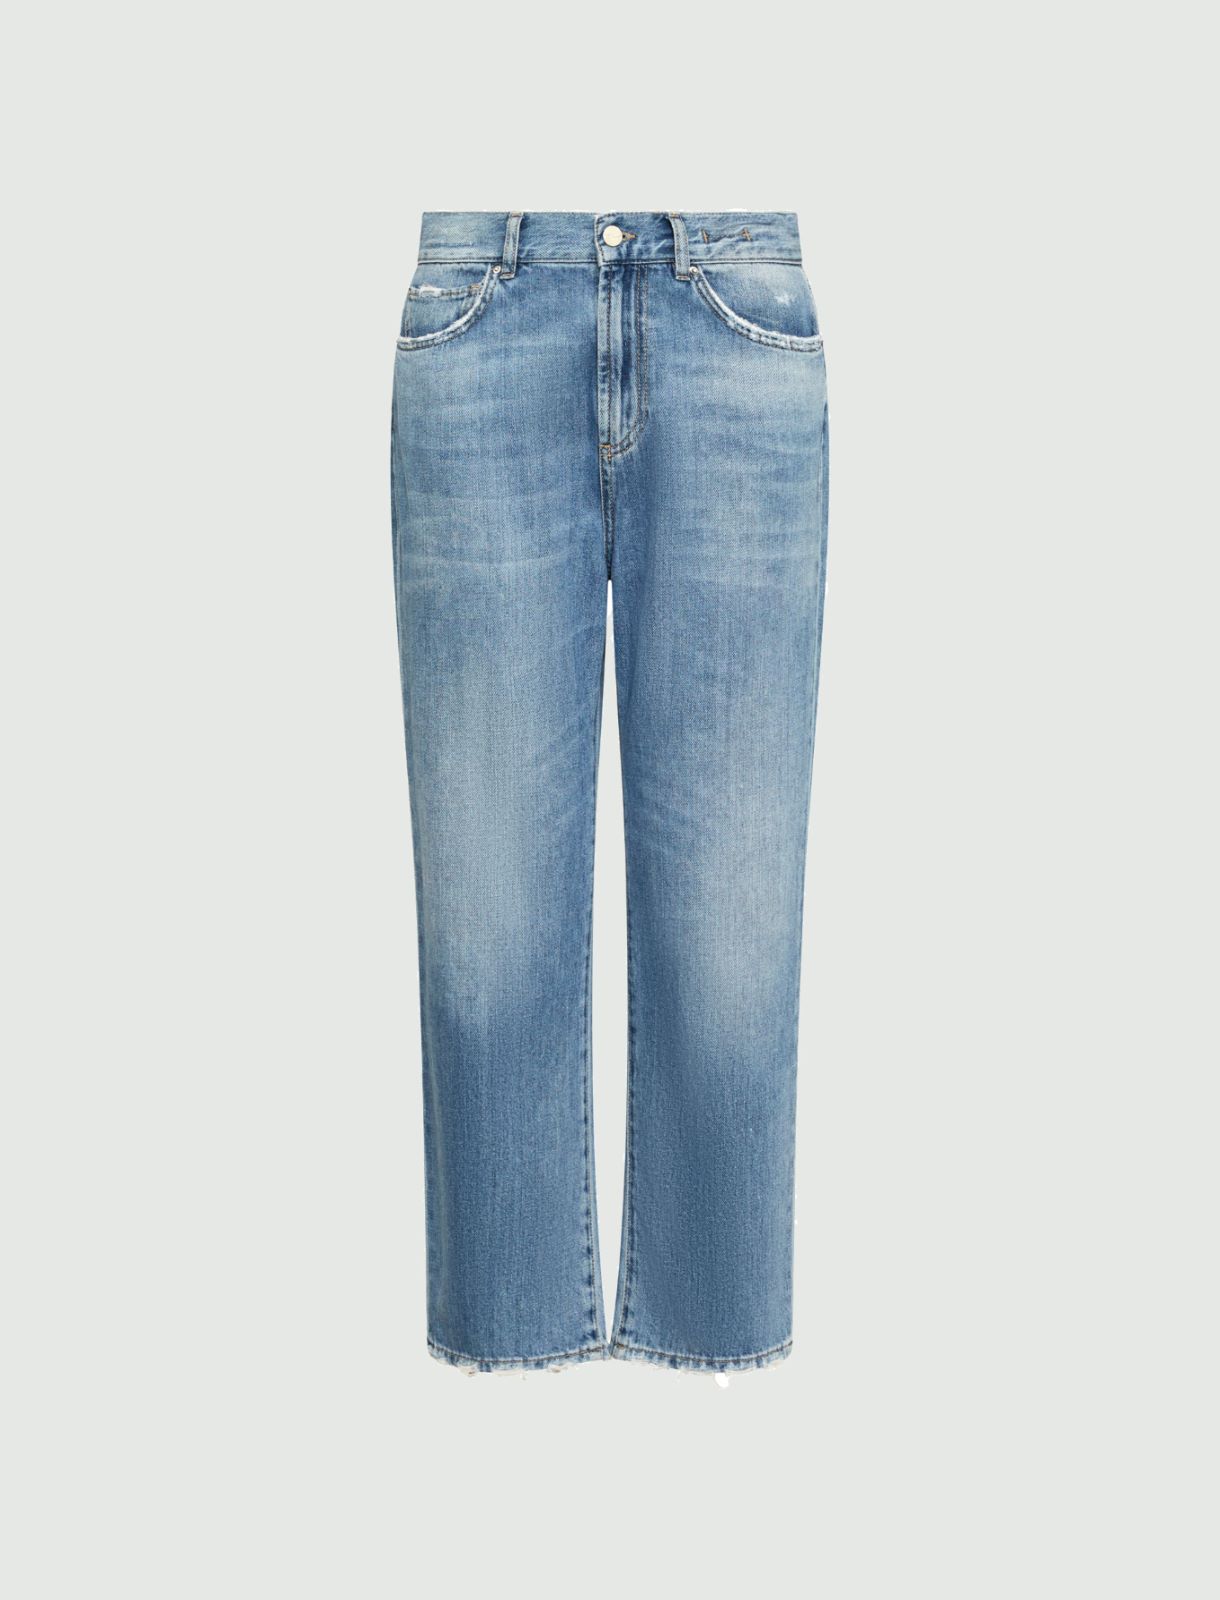 Jeans mom fit - Blue jeans - Marella - 2